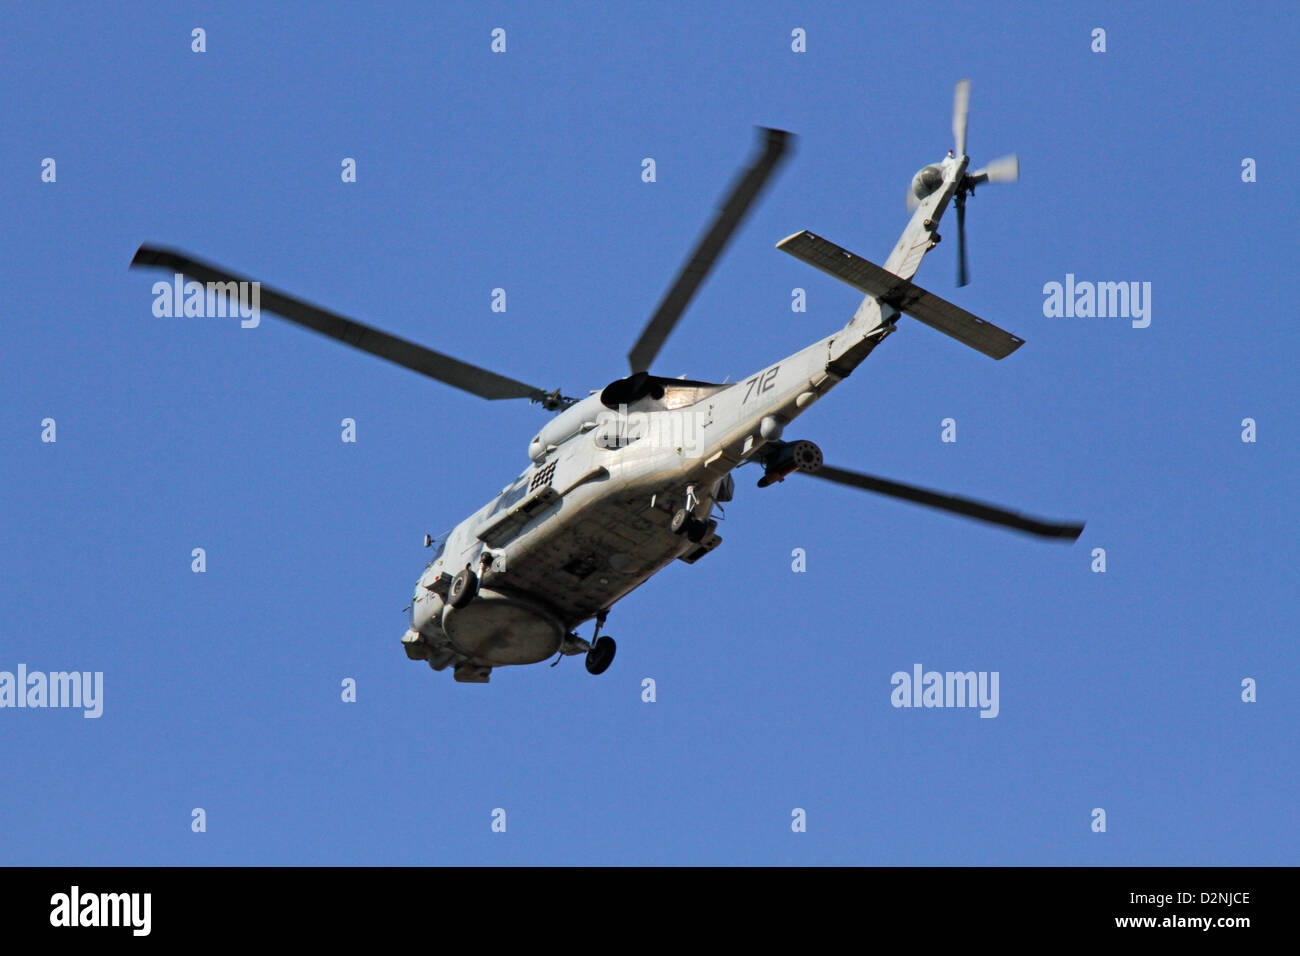 US Navy Sikorsky SH-60 Seahawk Helicopter Stock Photo